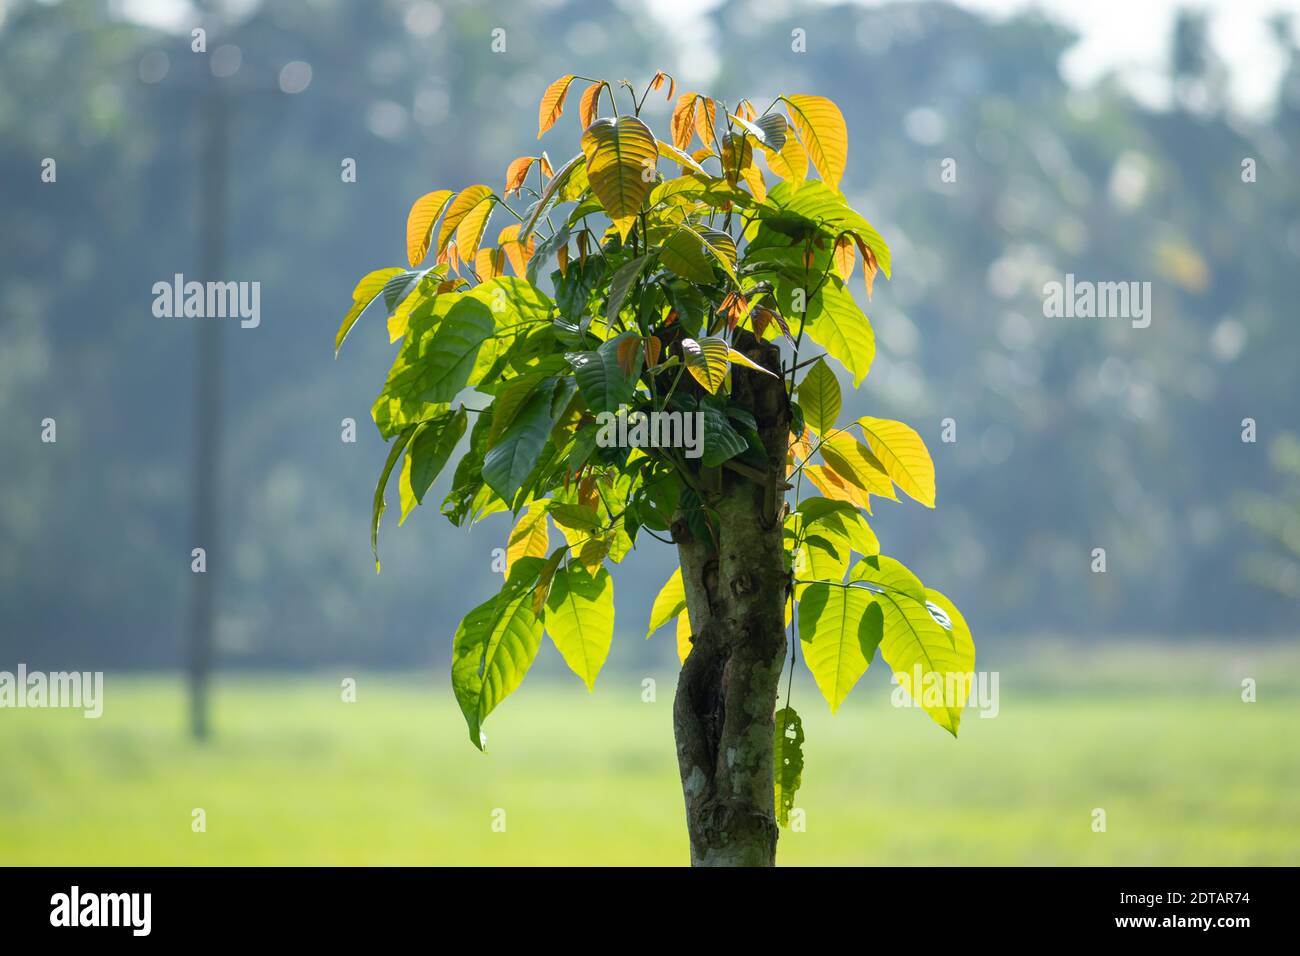 Fresh Donga tree leaves glowing in the early morning sunlight, fresh beginnings concept. Stock Photo